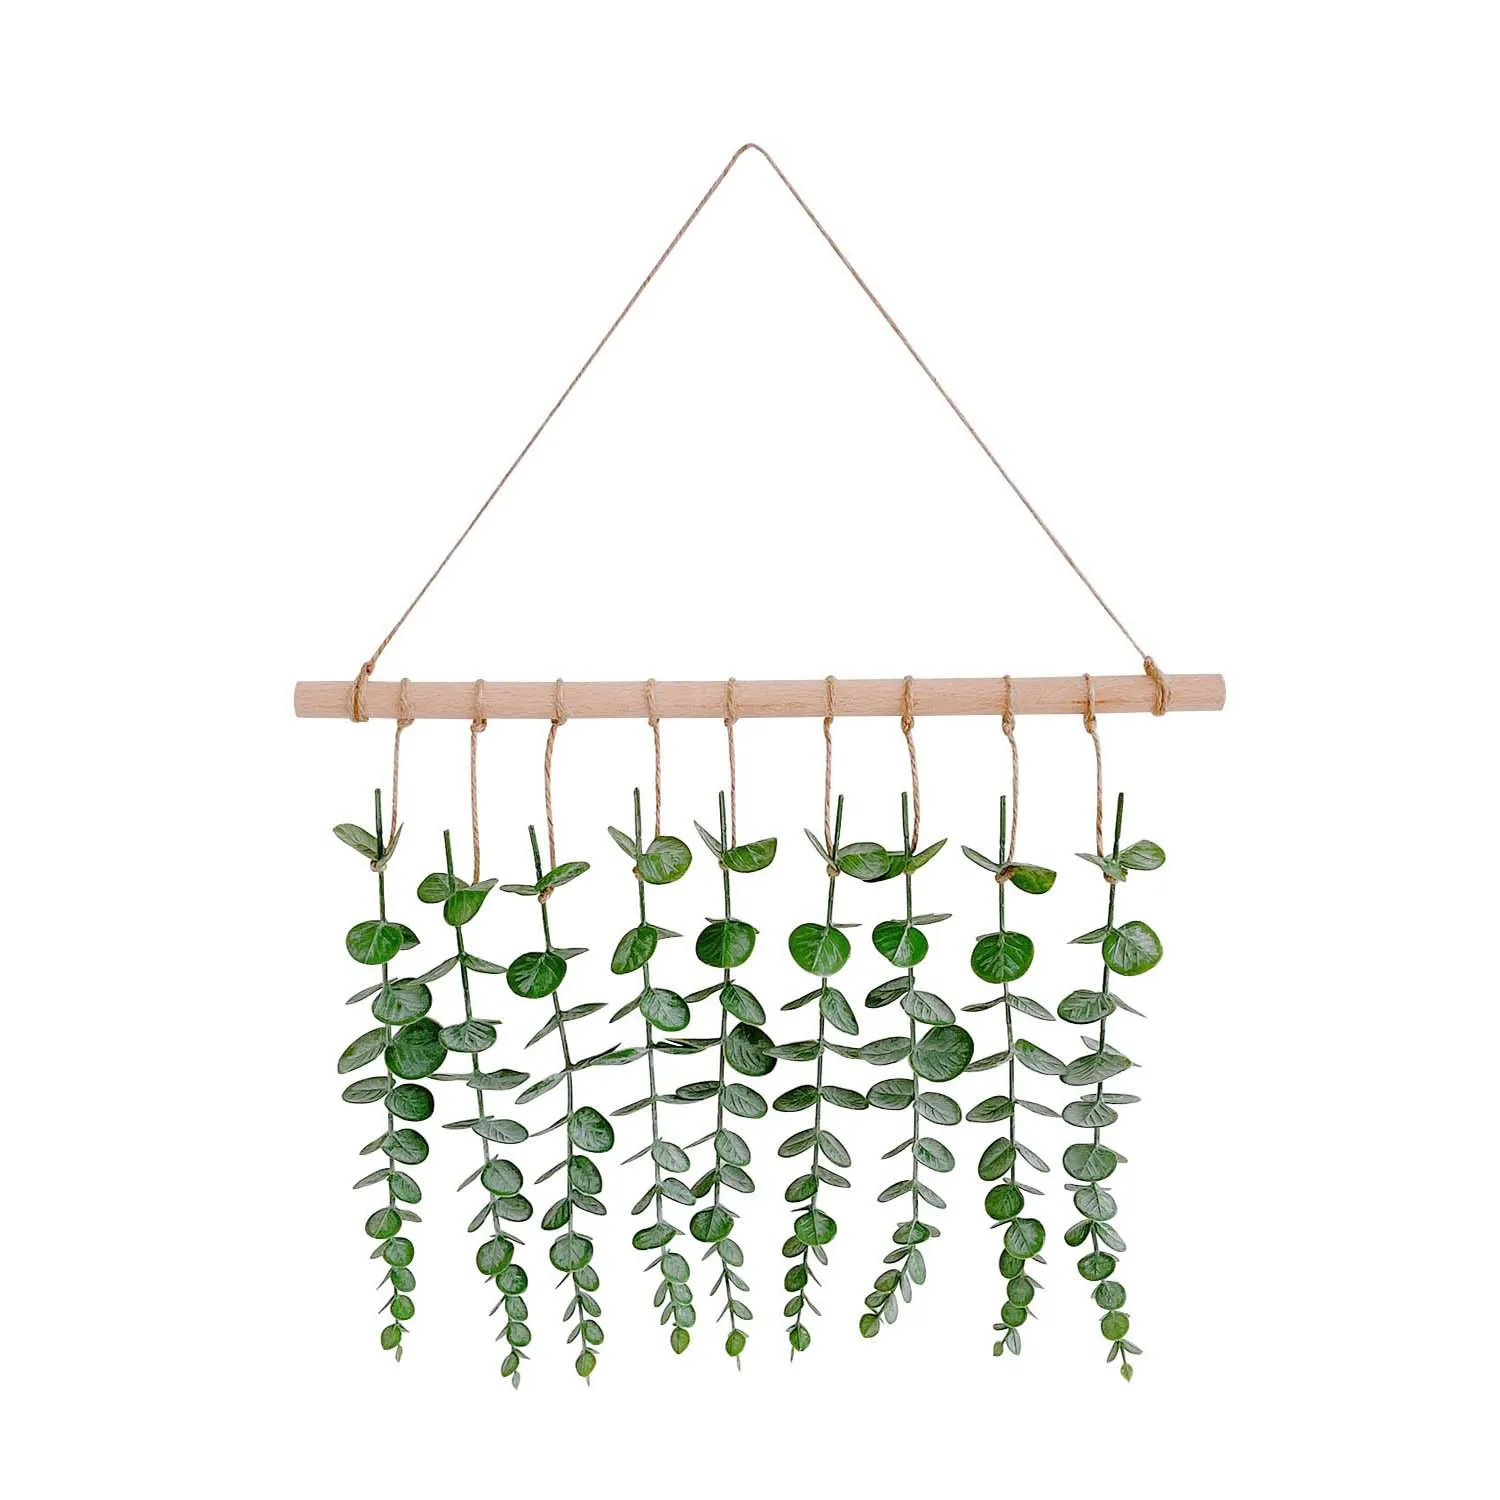 

Wall Home Decor Greenery Eucalyptus Vines Hanging Plants with Wooden Stick Artificial Eucalyptus leaves, Shown